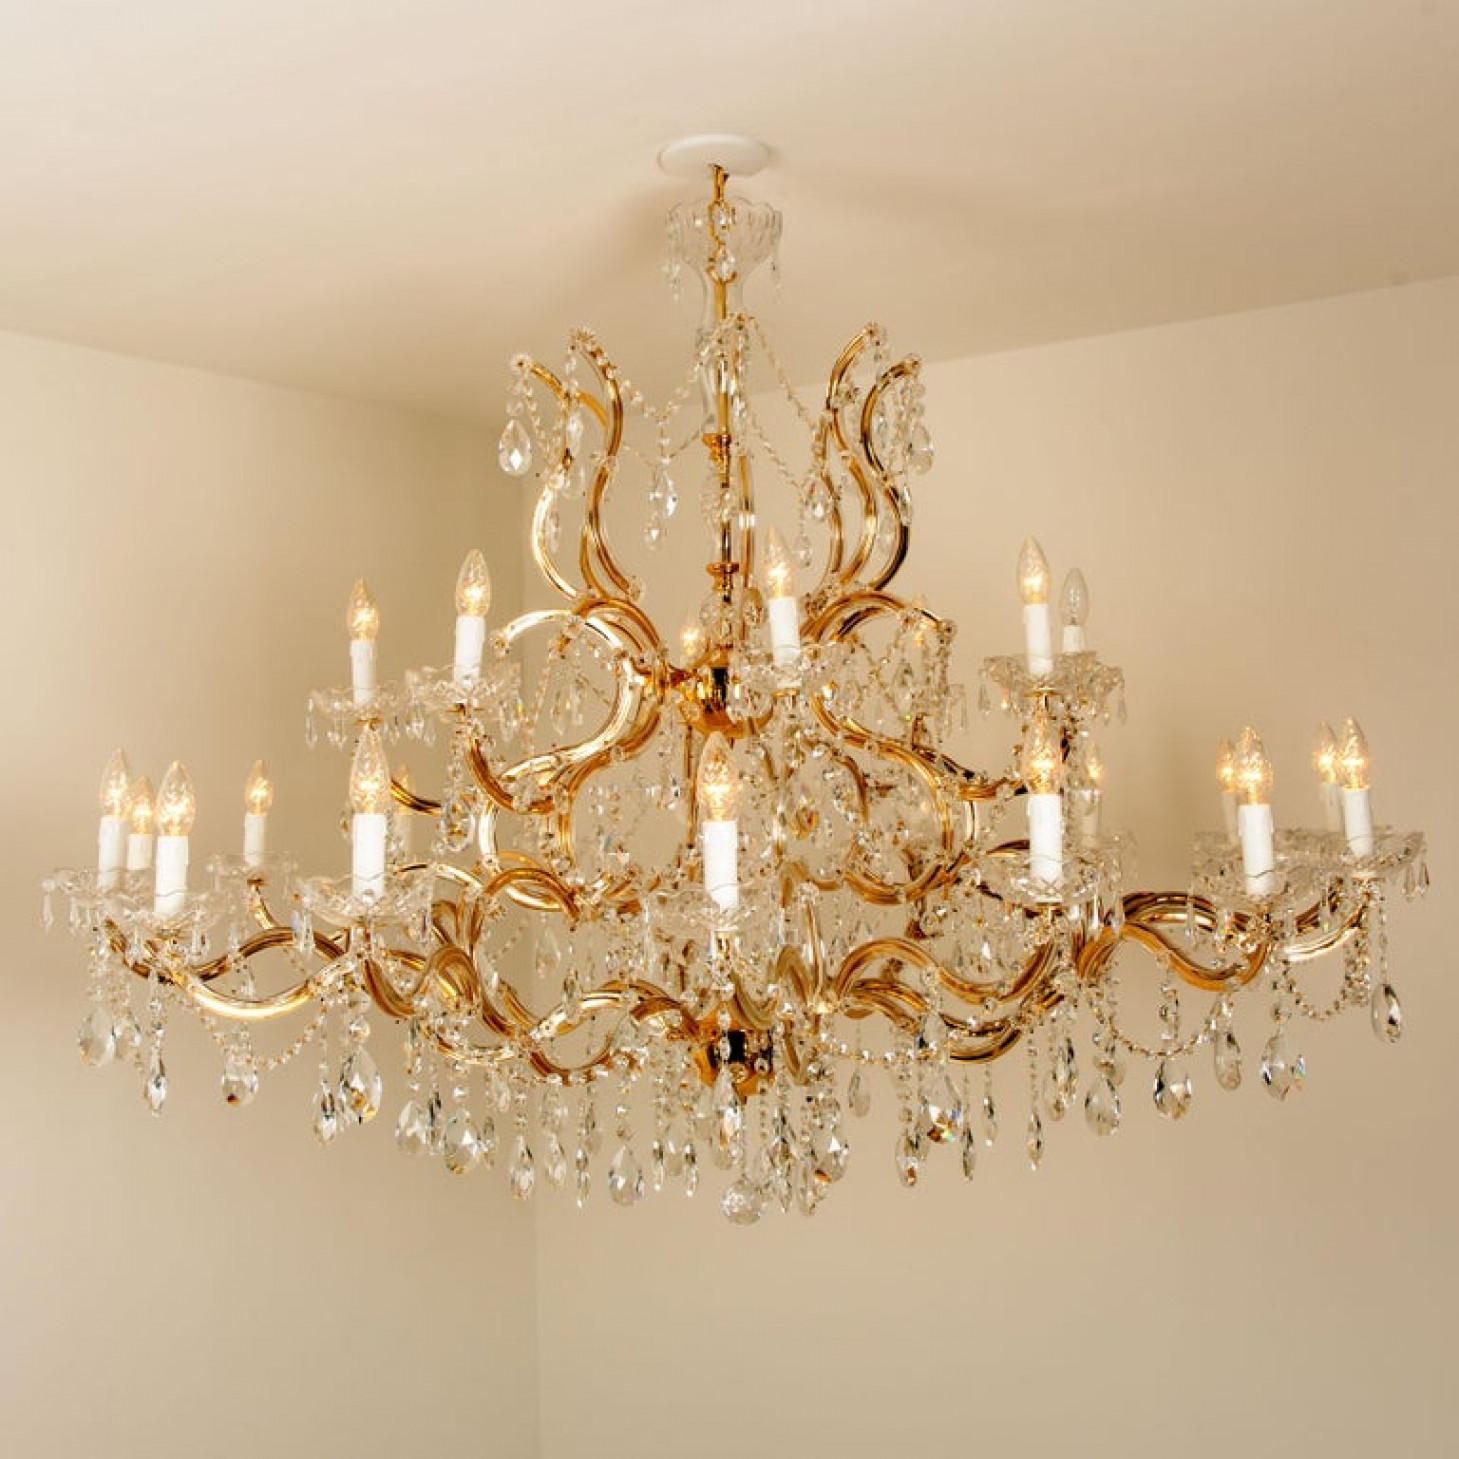 Faceted Huge High-End XXL Maria Theresa Gold Plated Swarovski Chandelier For Sale